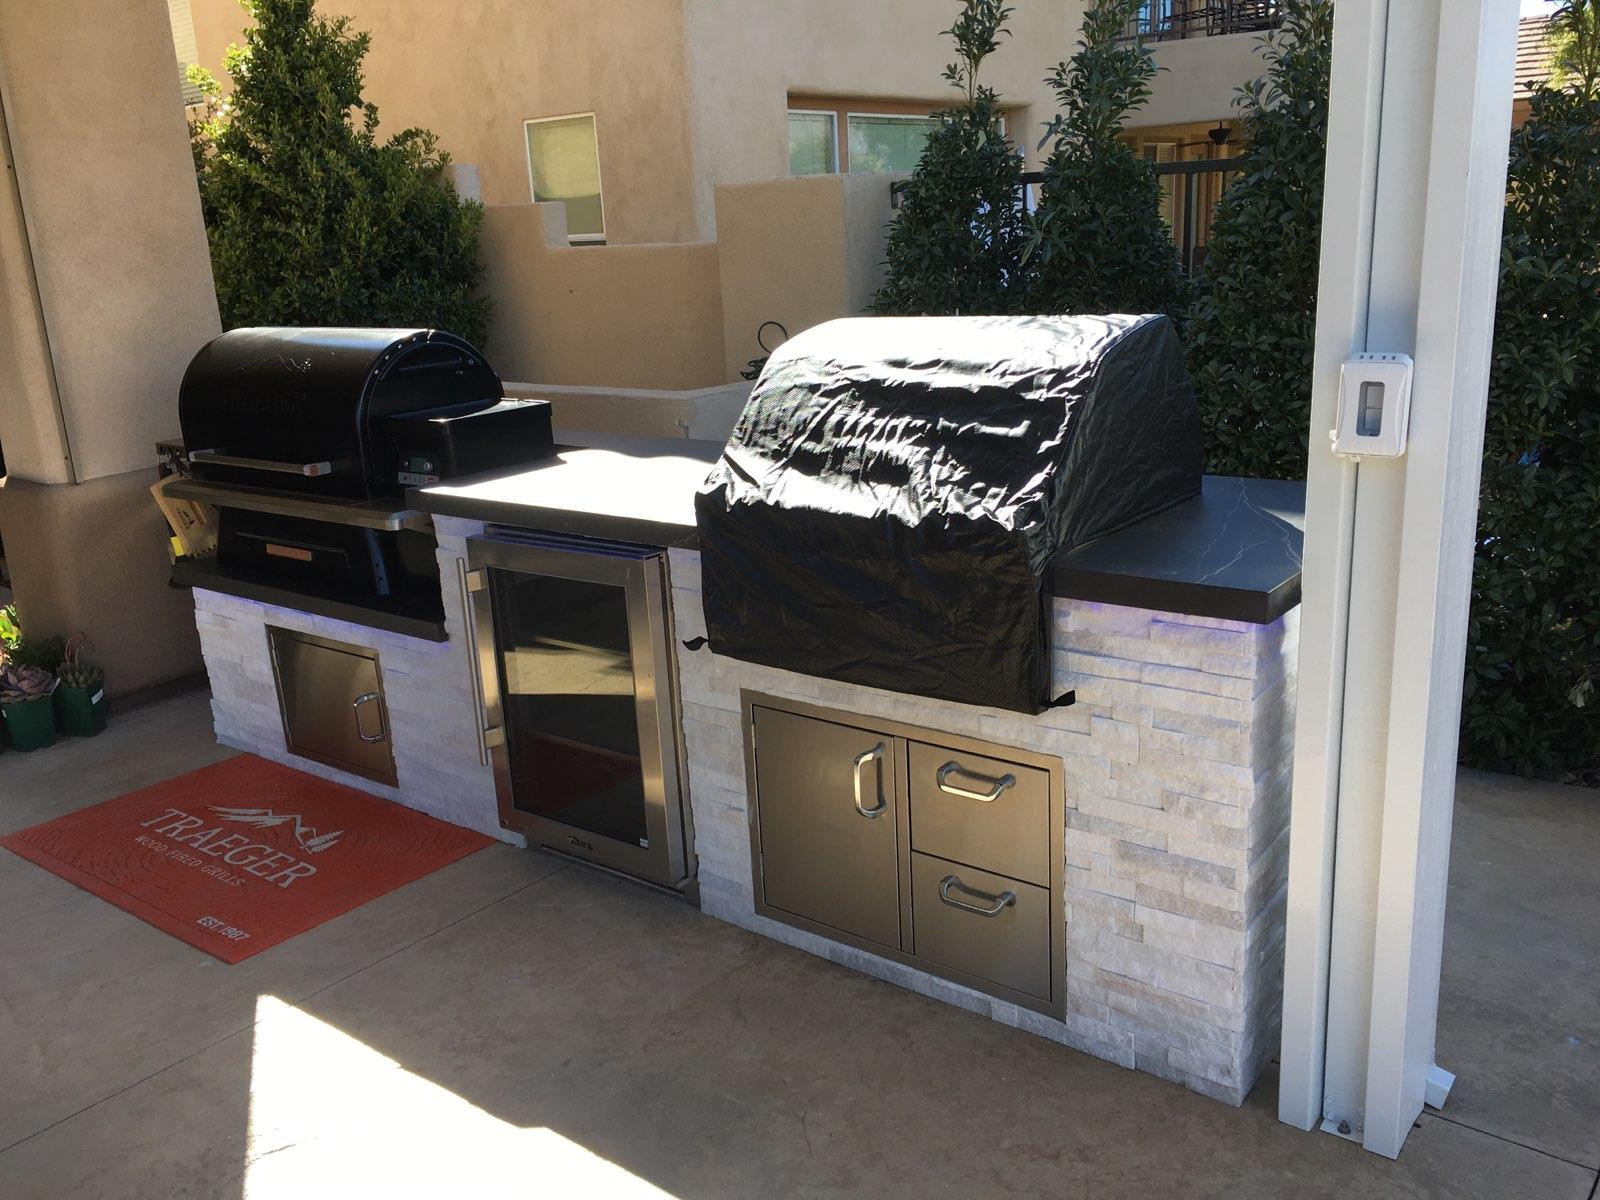 Traeger Built In Outdoor Kitchen
 Barbecue With A View Outdoor Kitchen by BBQ Concepts